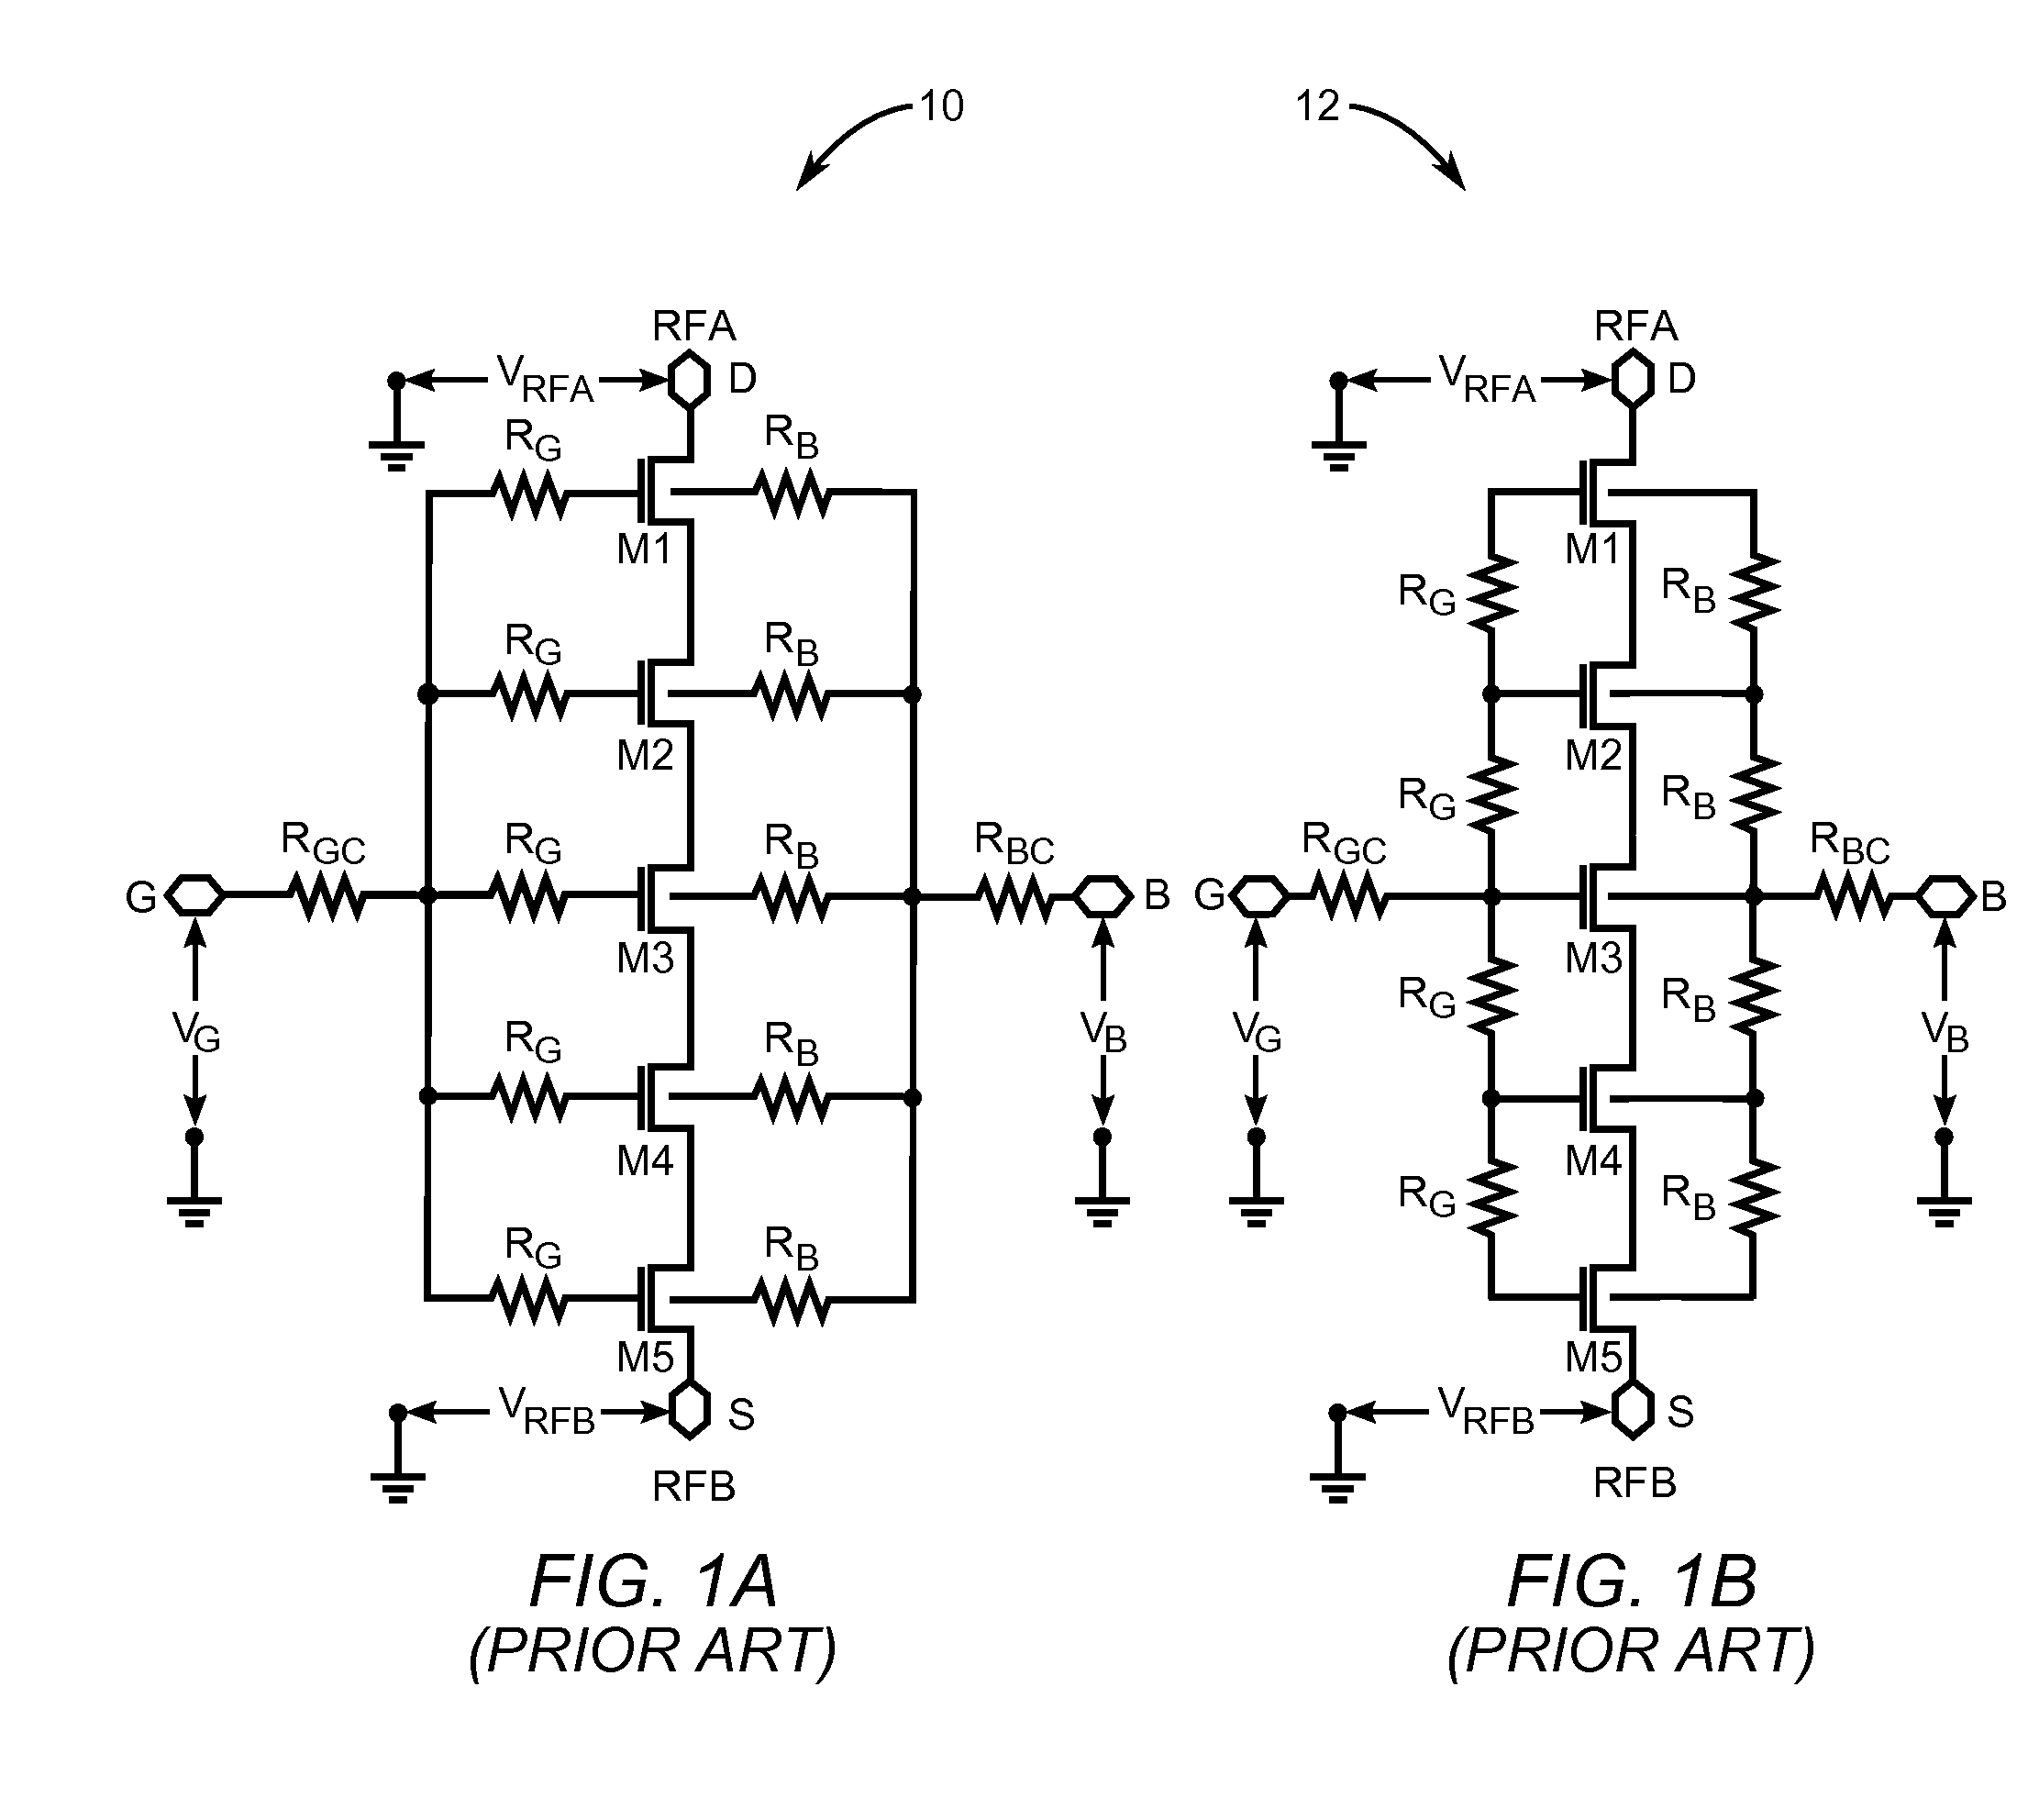 Harmonic cancellation circuit for an RF switch branch